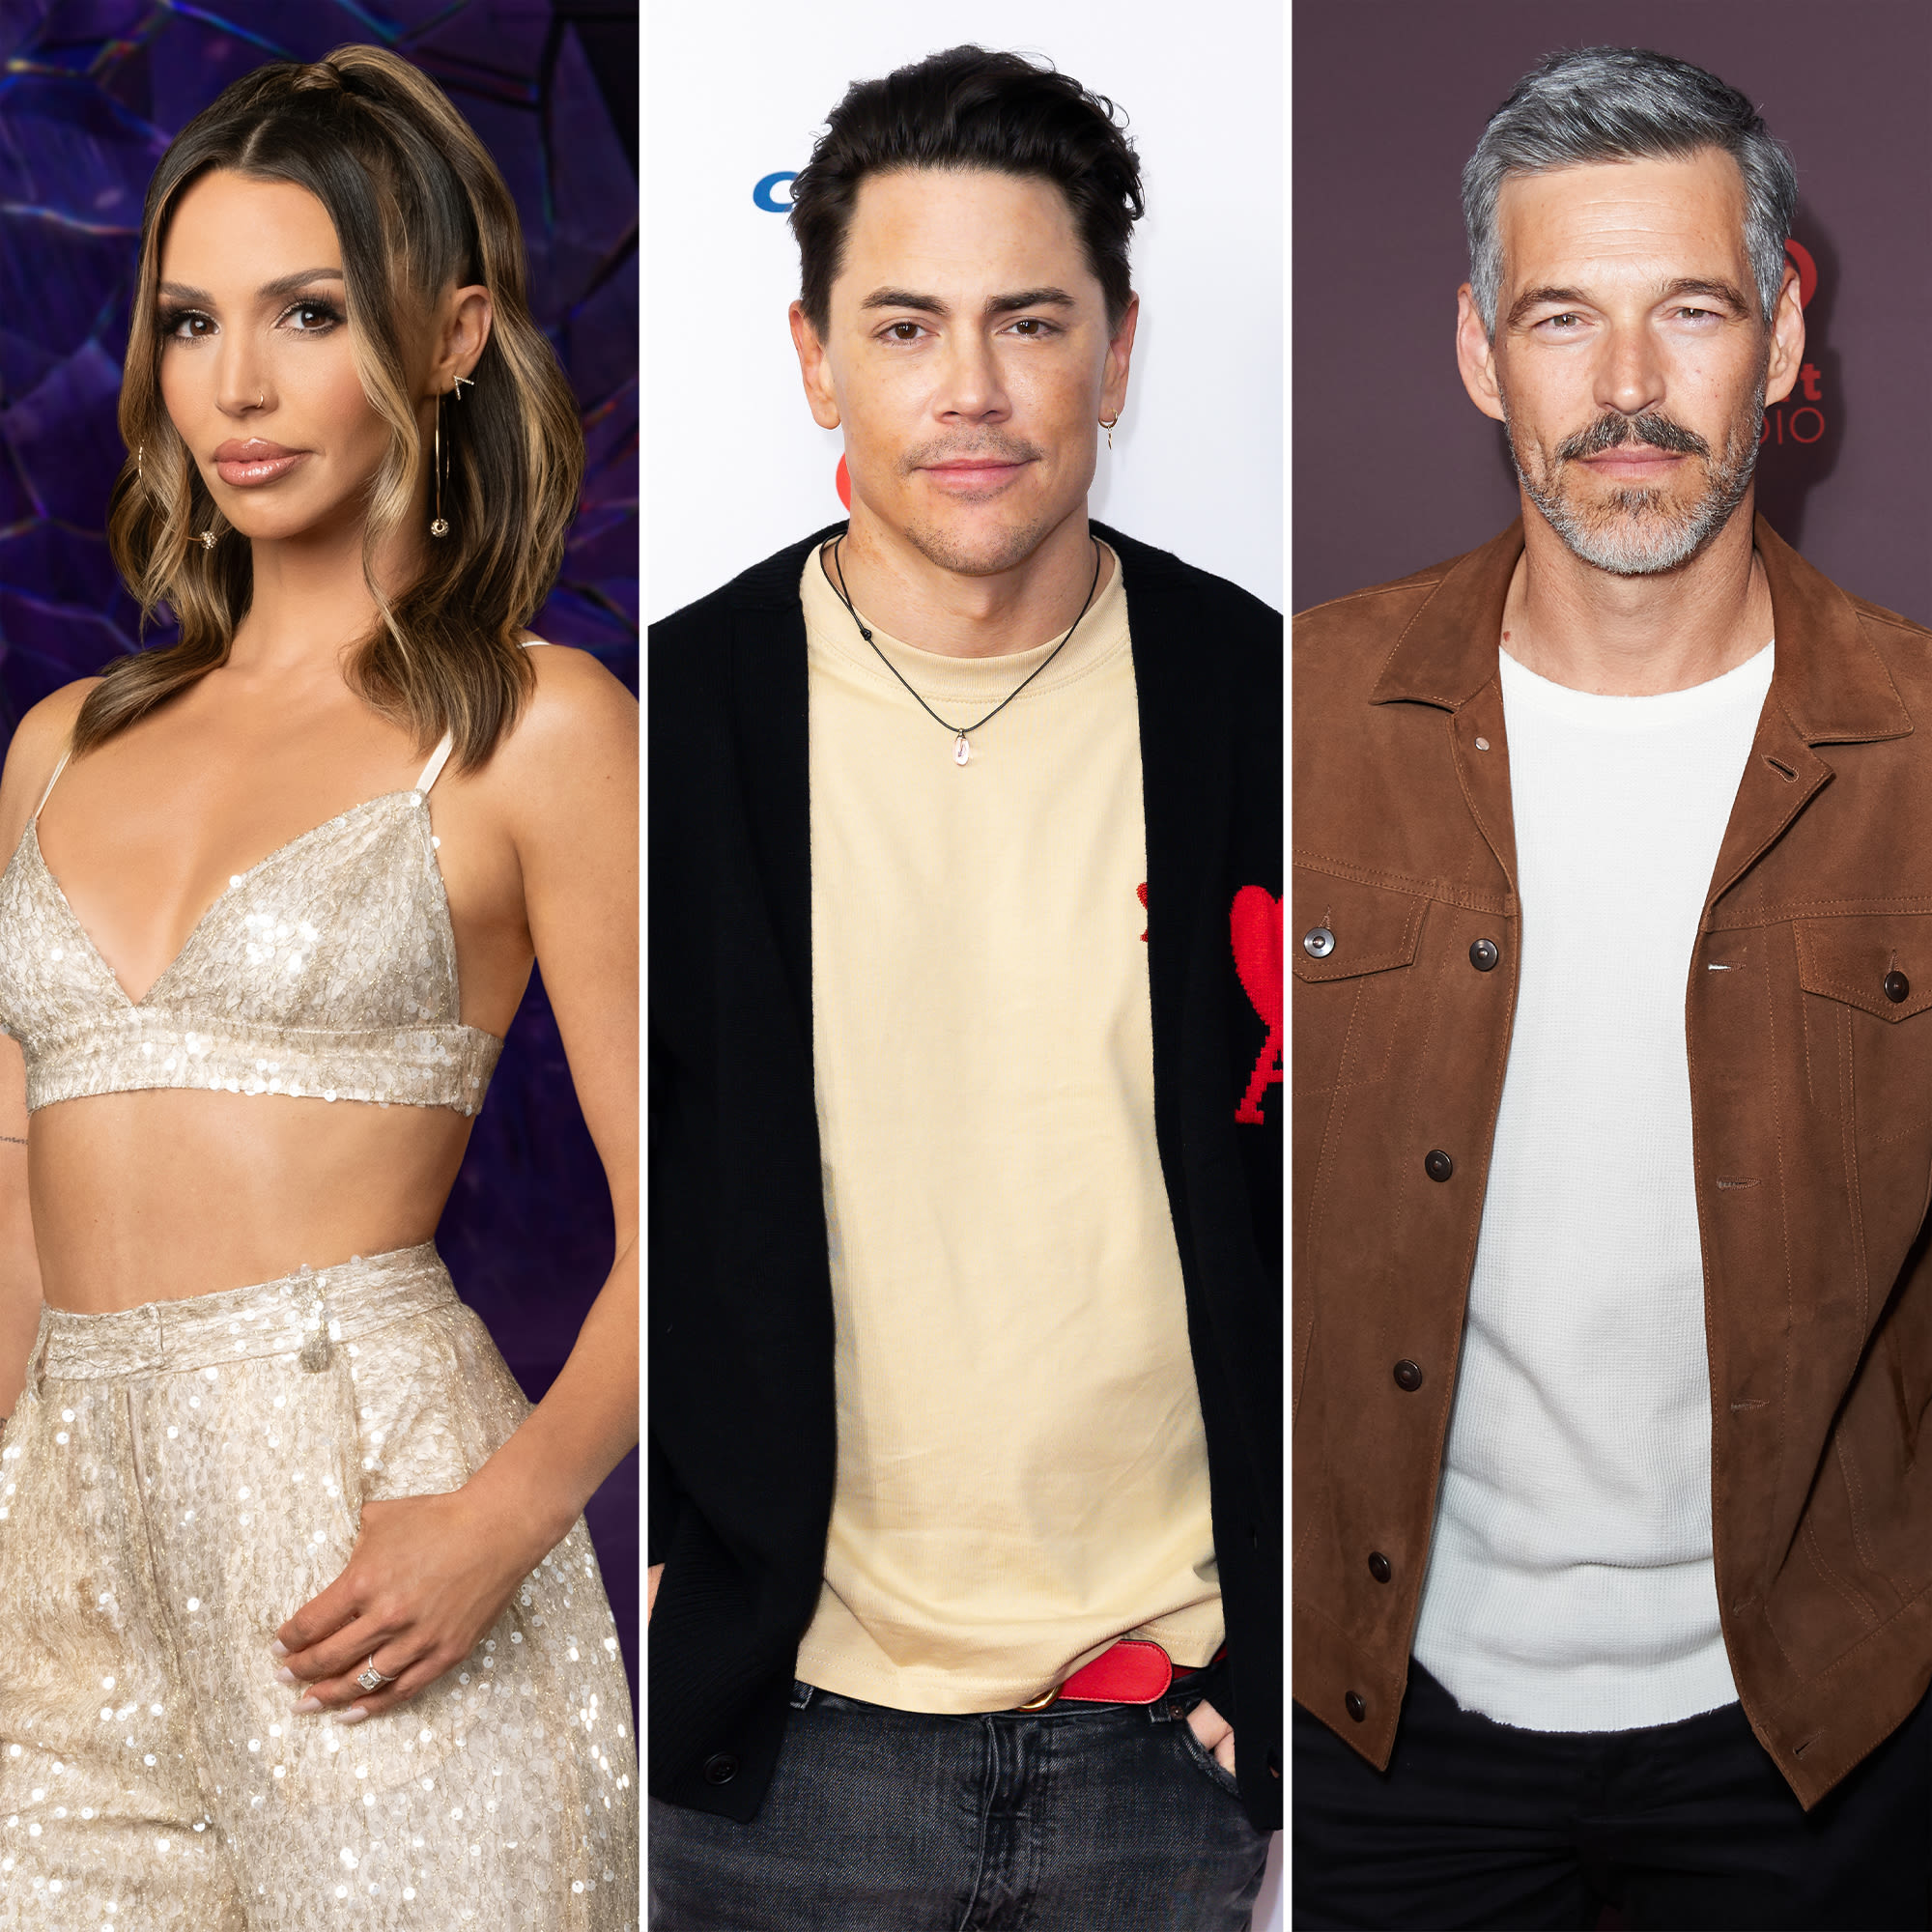 Scheana Shay Rips Into Tom Sandoval After He Brings Up How ‘She Was the Other Woman’ in a Relationship